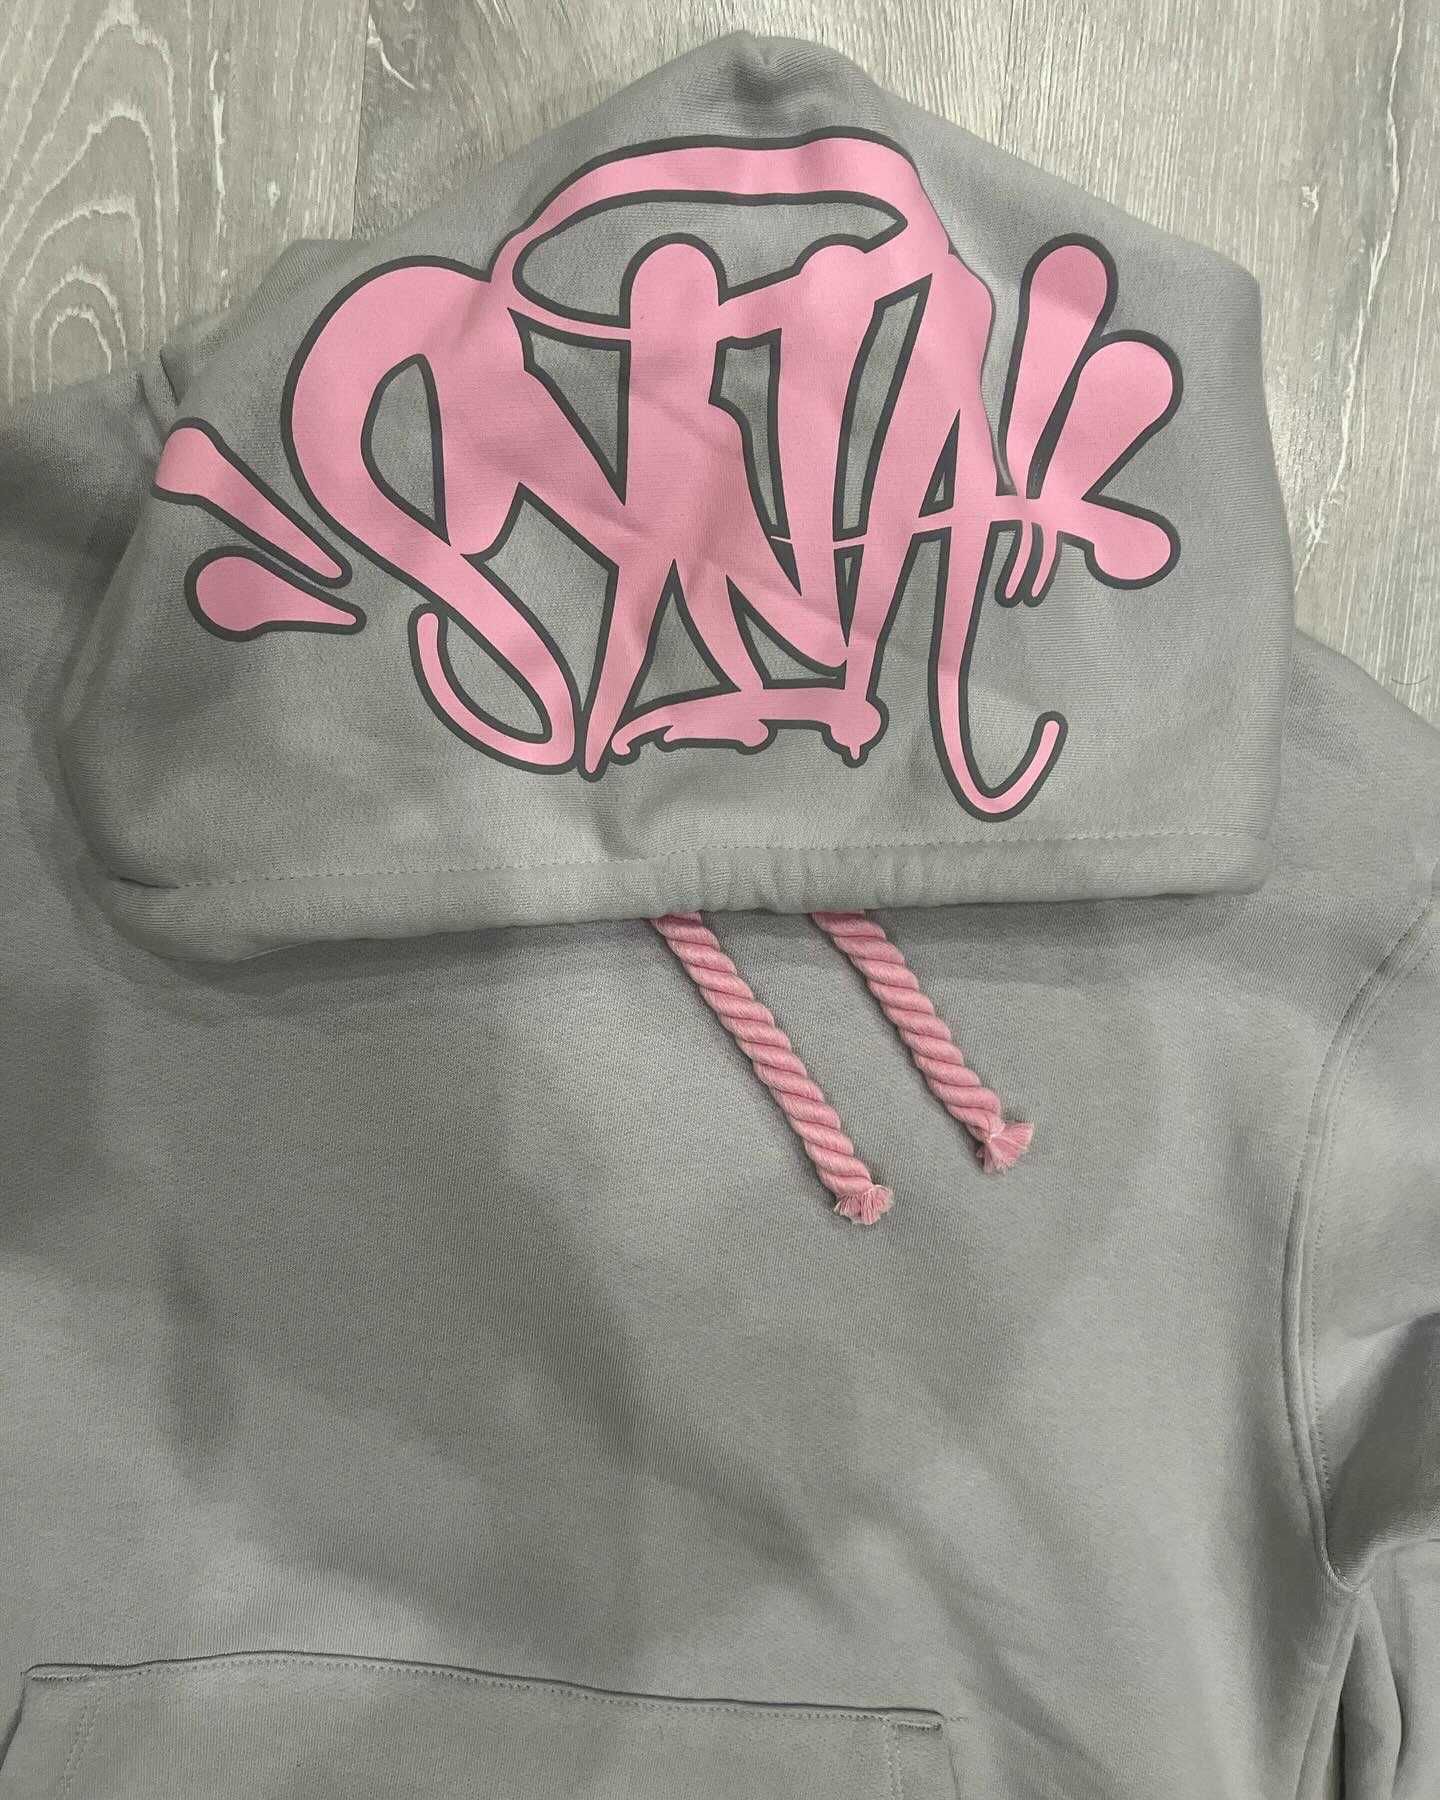 Tracksuit Syna World ( Central Cee )